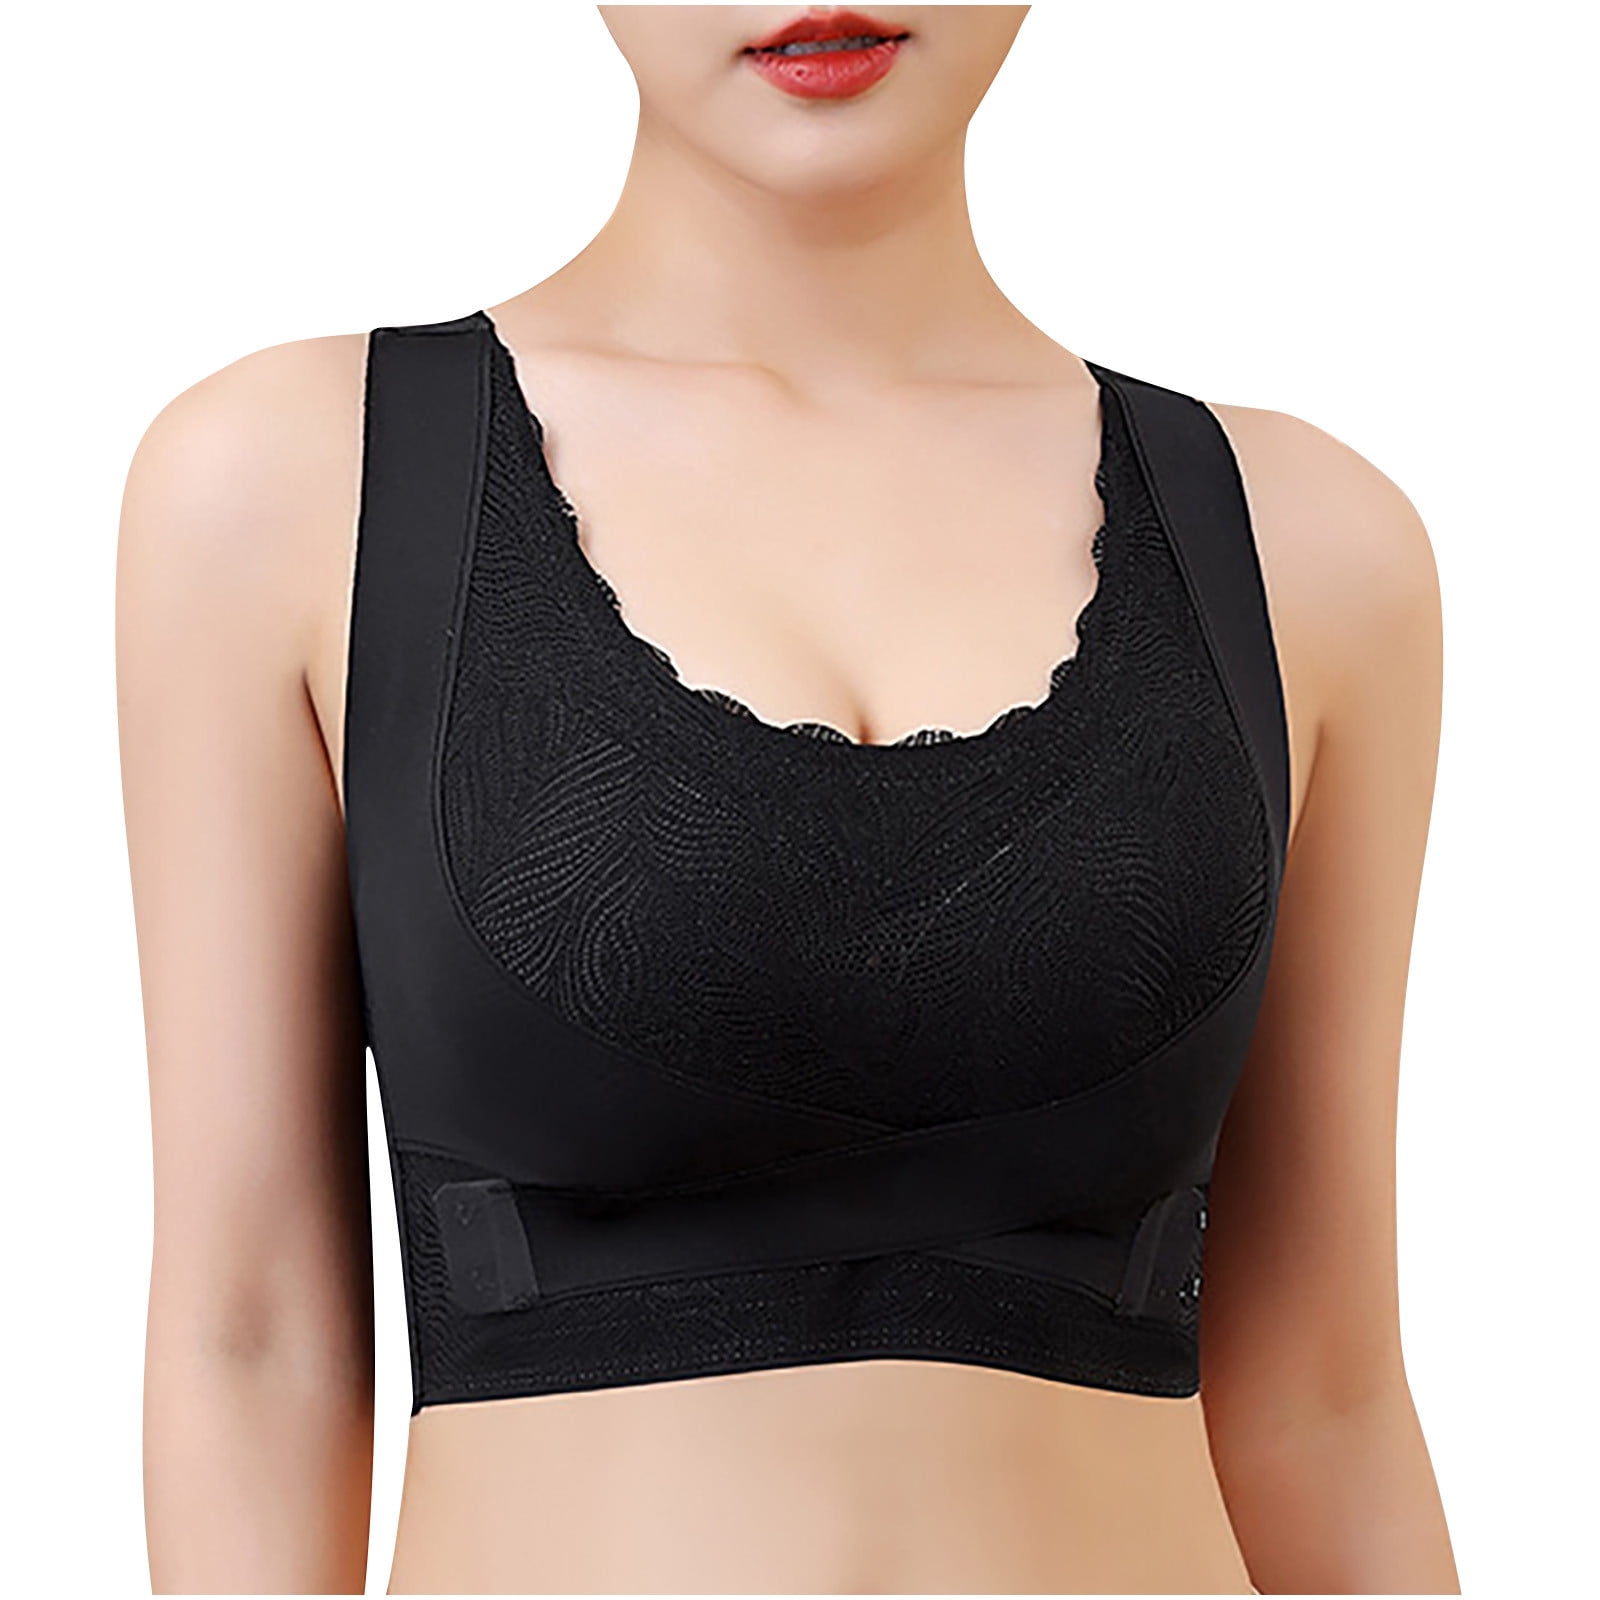 Plus Size Bras for Women Wireless 3XL Adjustable Sports Front Closure  Extra-Elastic Breathable Push Up Trim Comfy Bra Black at  Women's  Clothing store